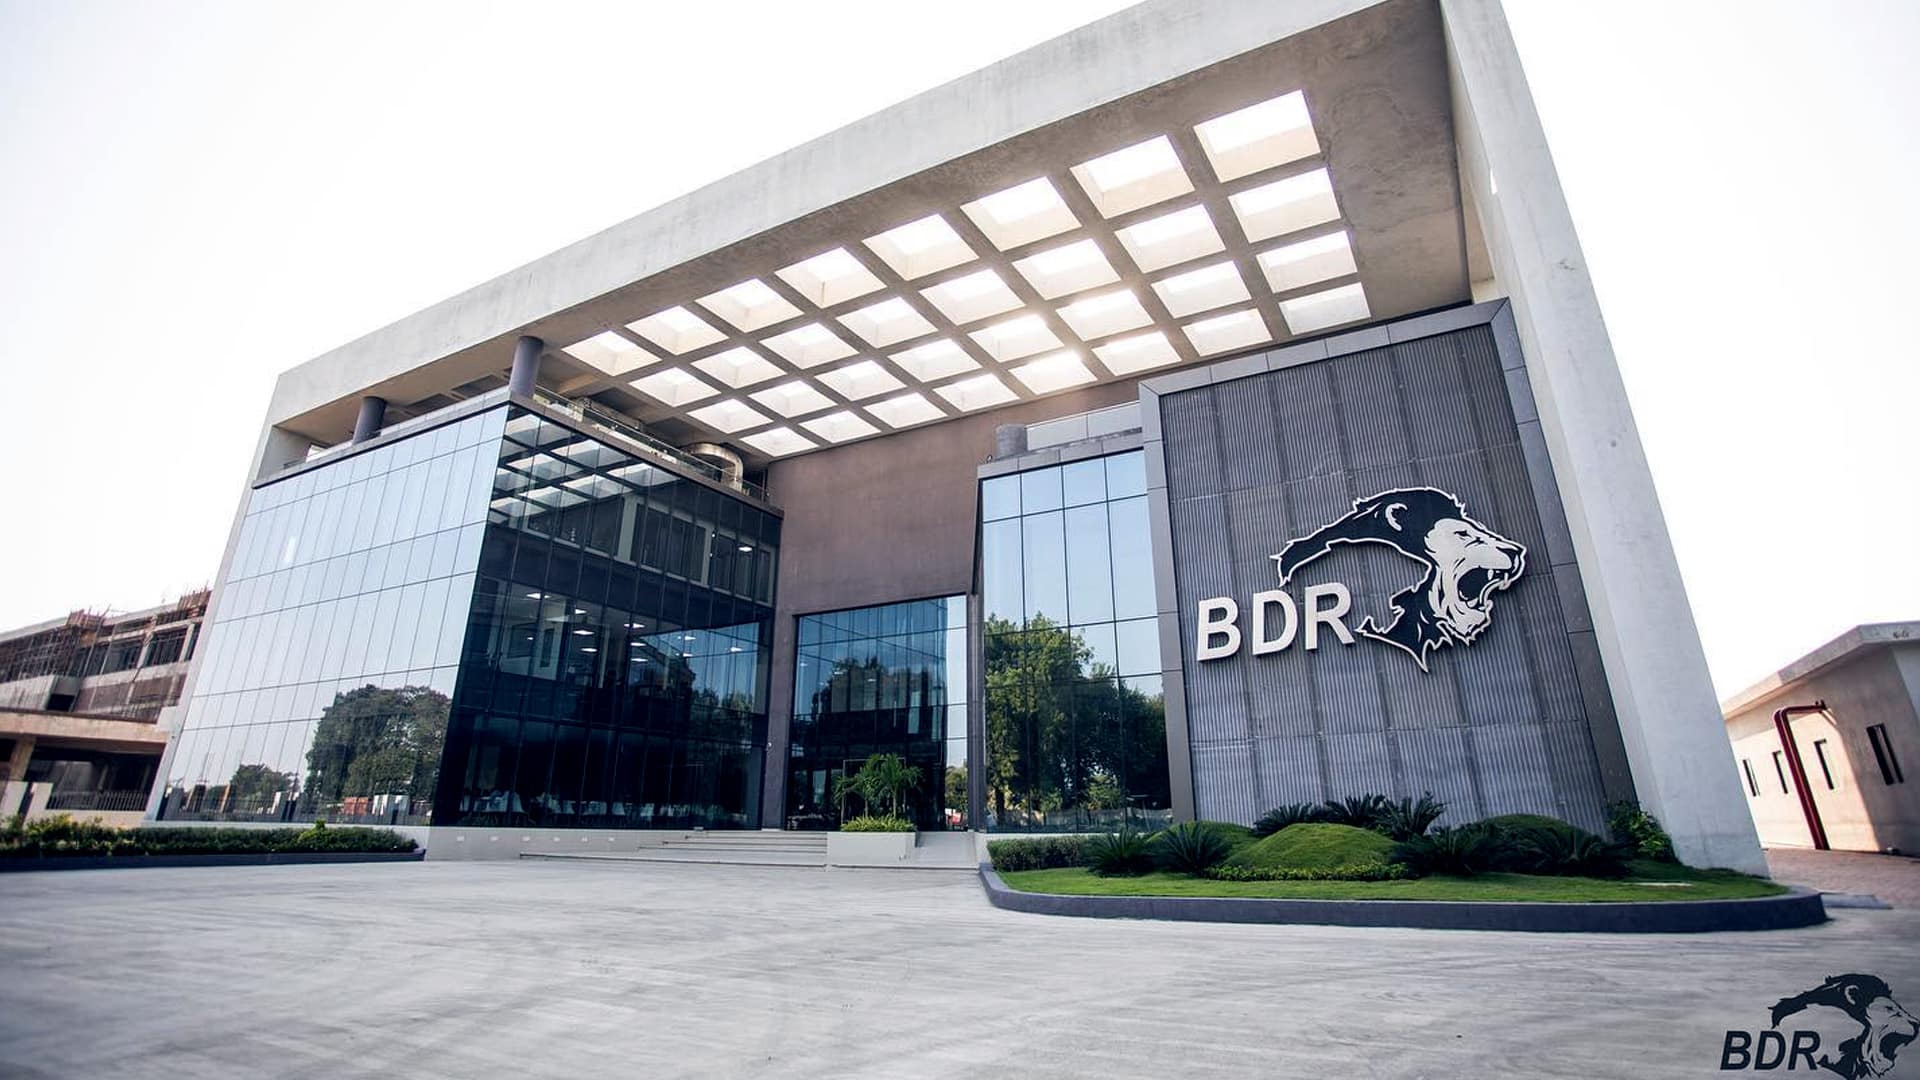 BDR Pharma inks license agreement with DRDO to produce COVID-19 drug 2-DG